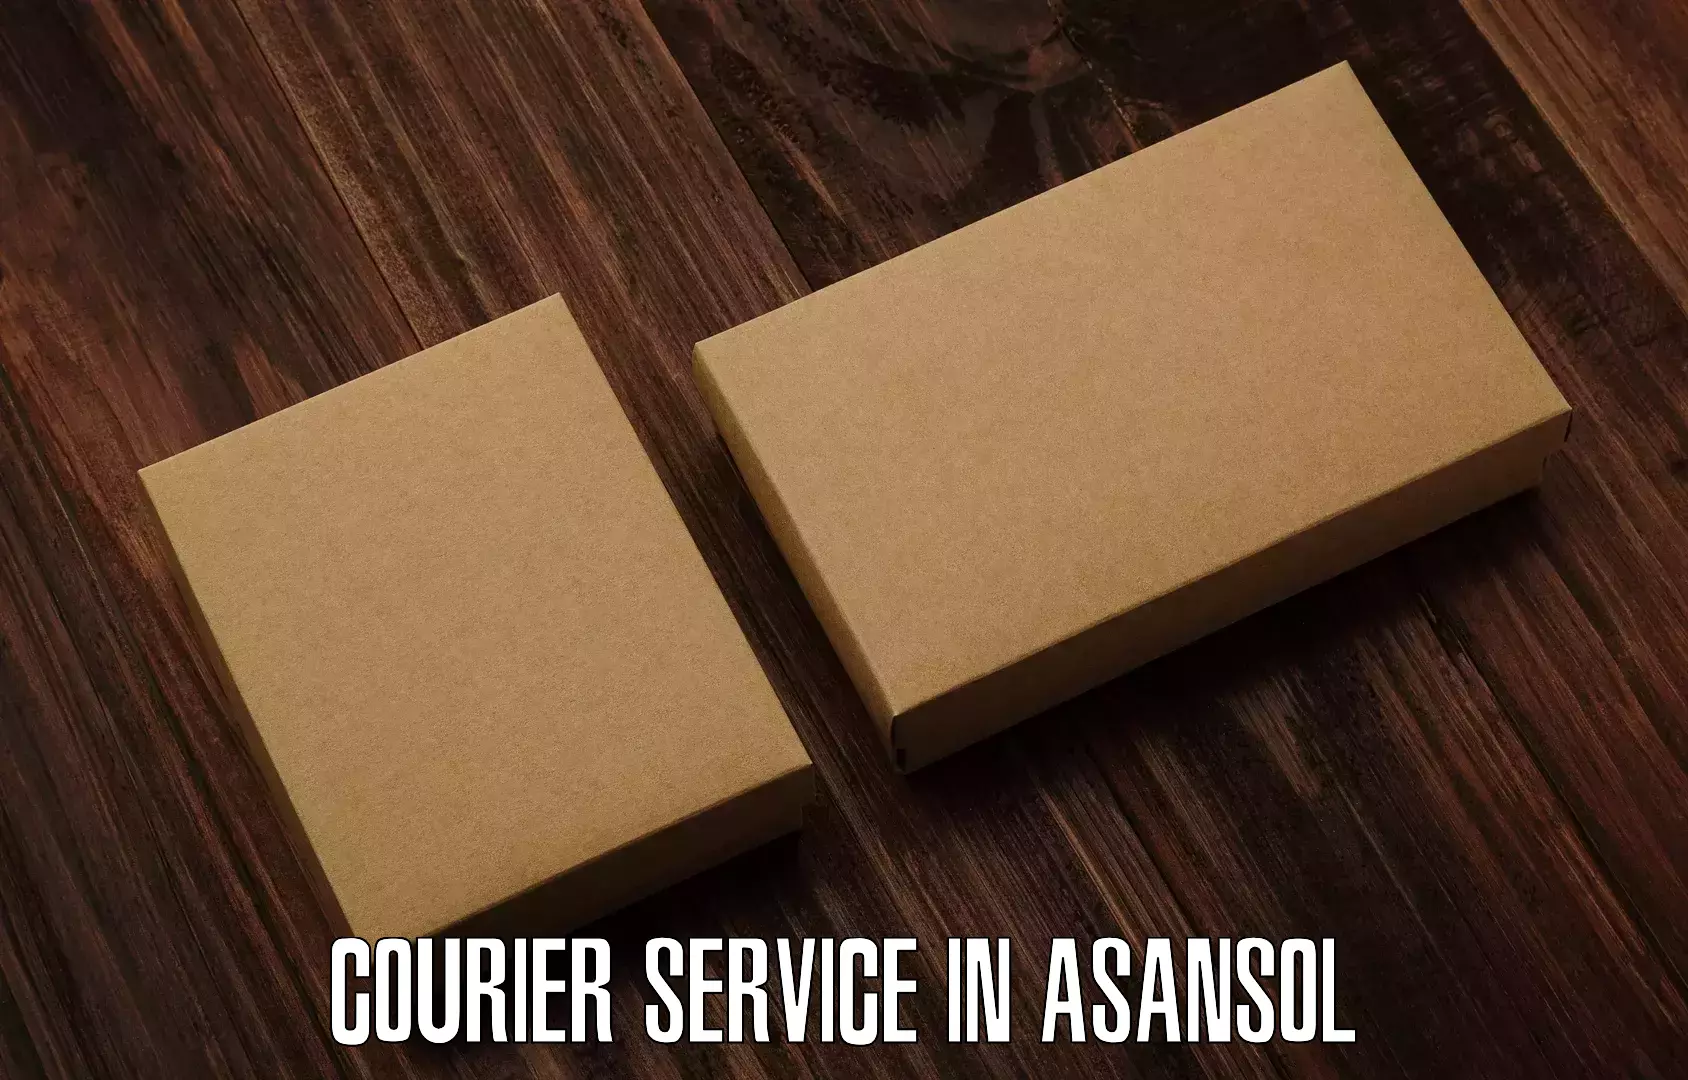 Residential courier service in Asansol